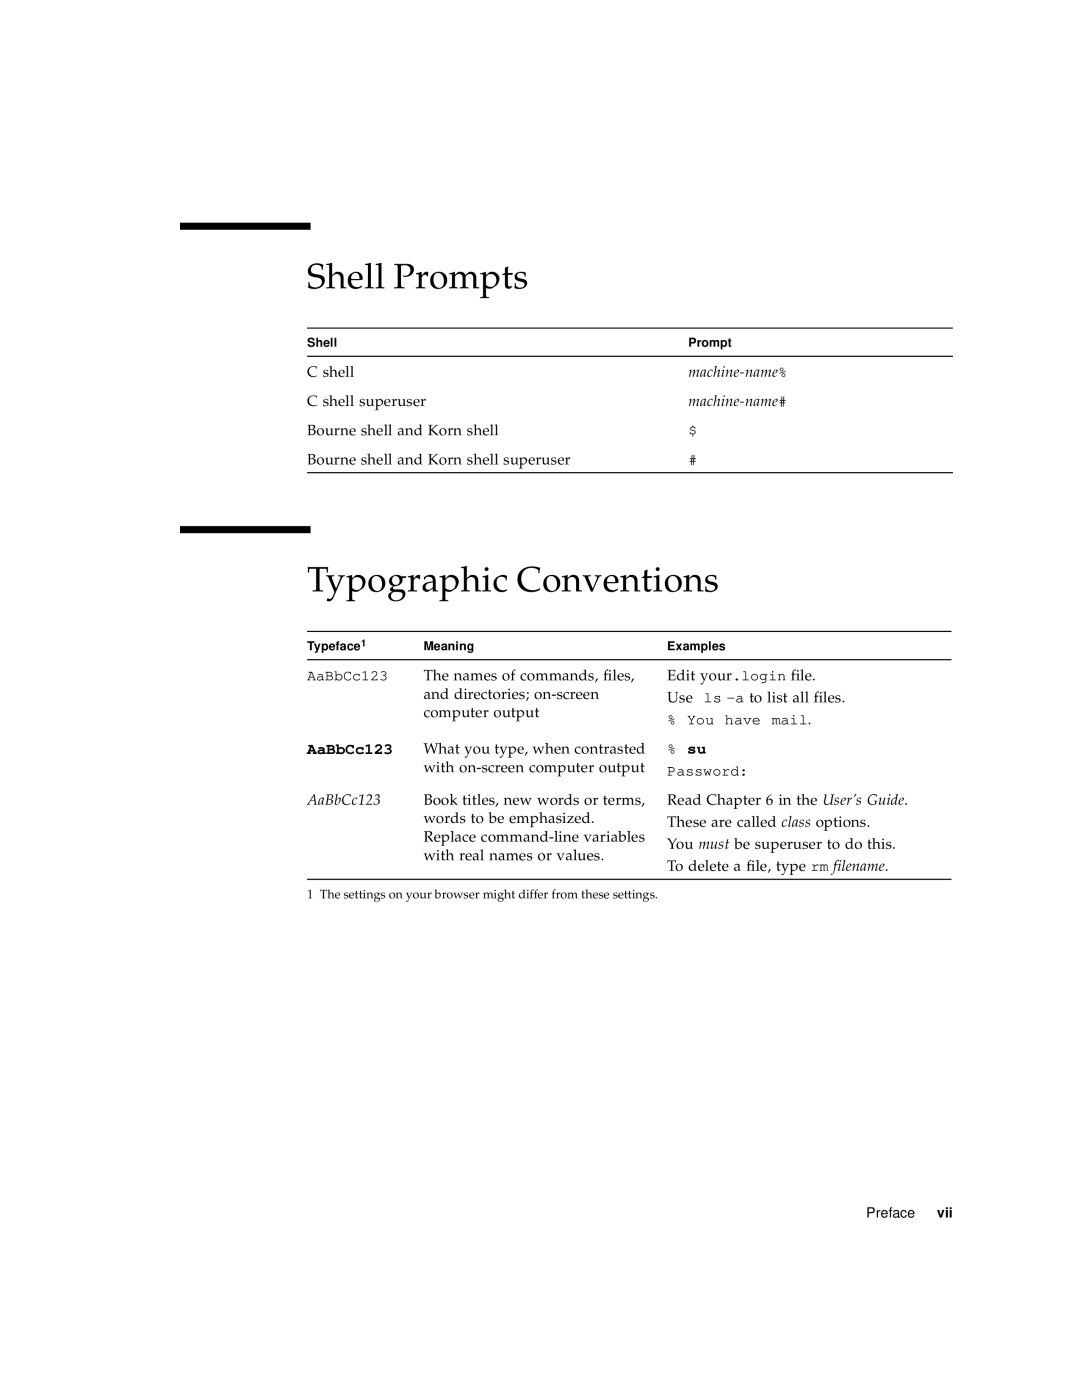 Sun Microsystems 3.2 manual Shell Prompts, Typographic Conventions 